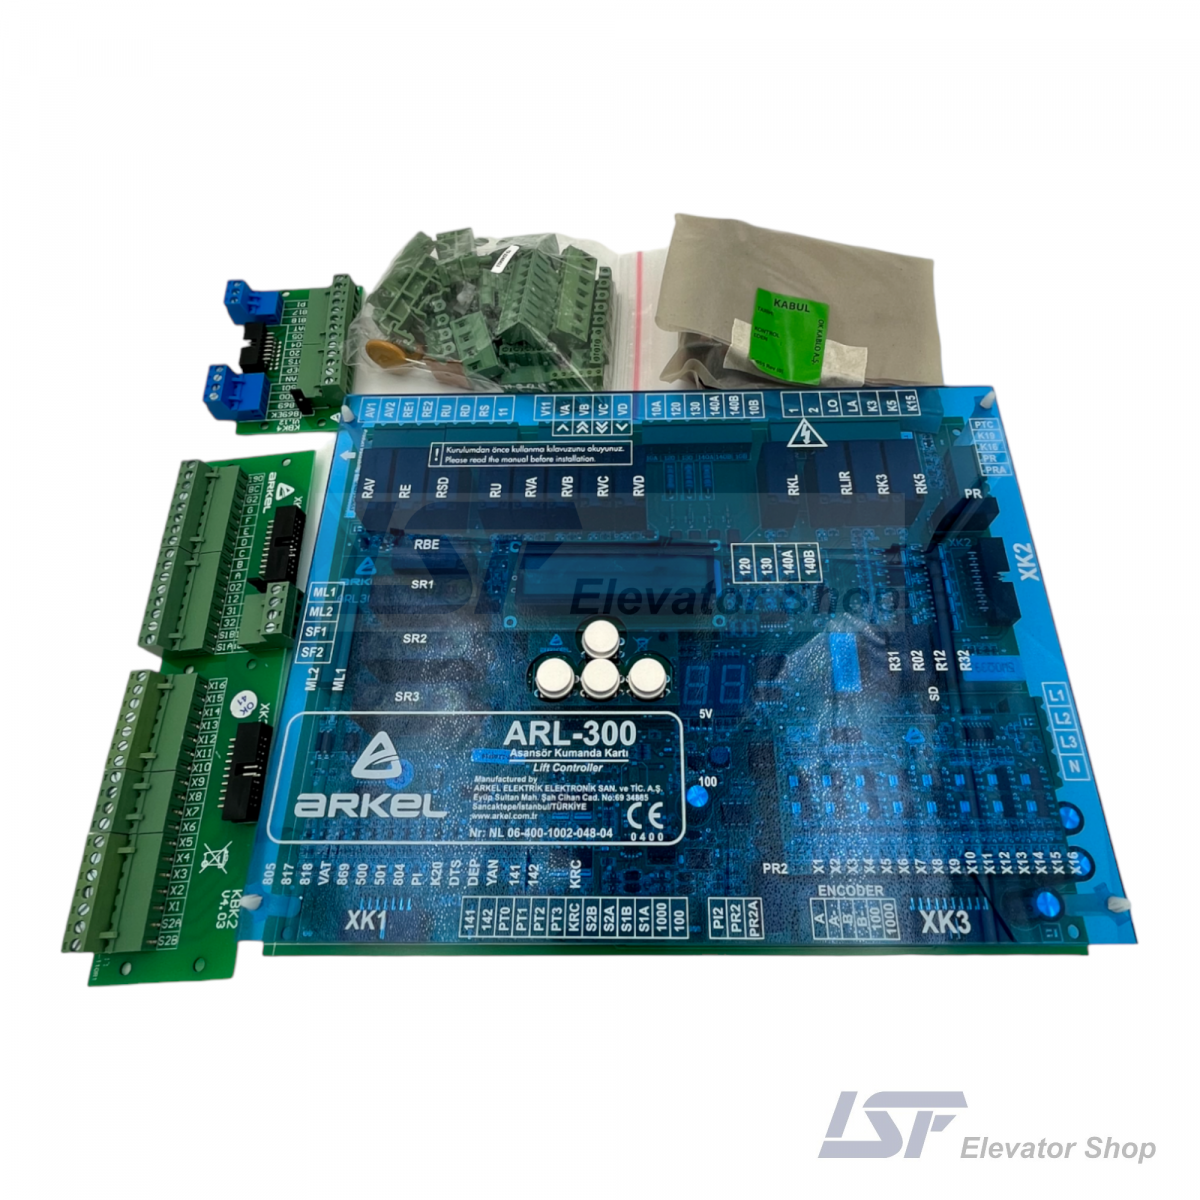 ARL 300 Arkel Elevator / Lift Control Card. ARL-300 with connection equipment. (Control Board for Hydraulic and Rope Lifts)